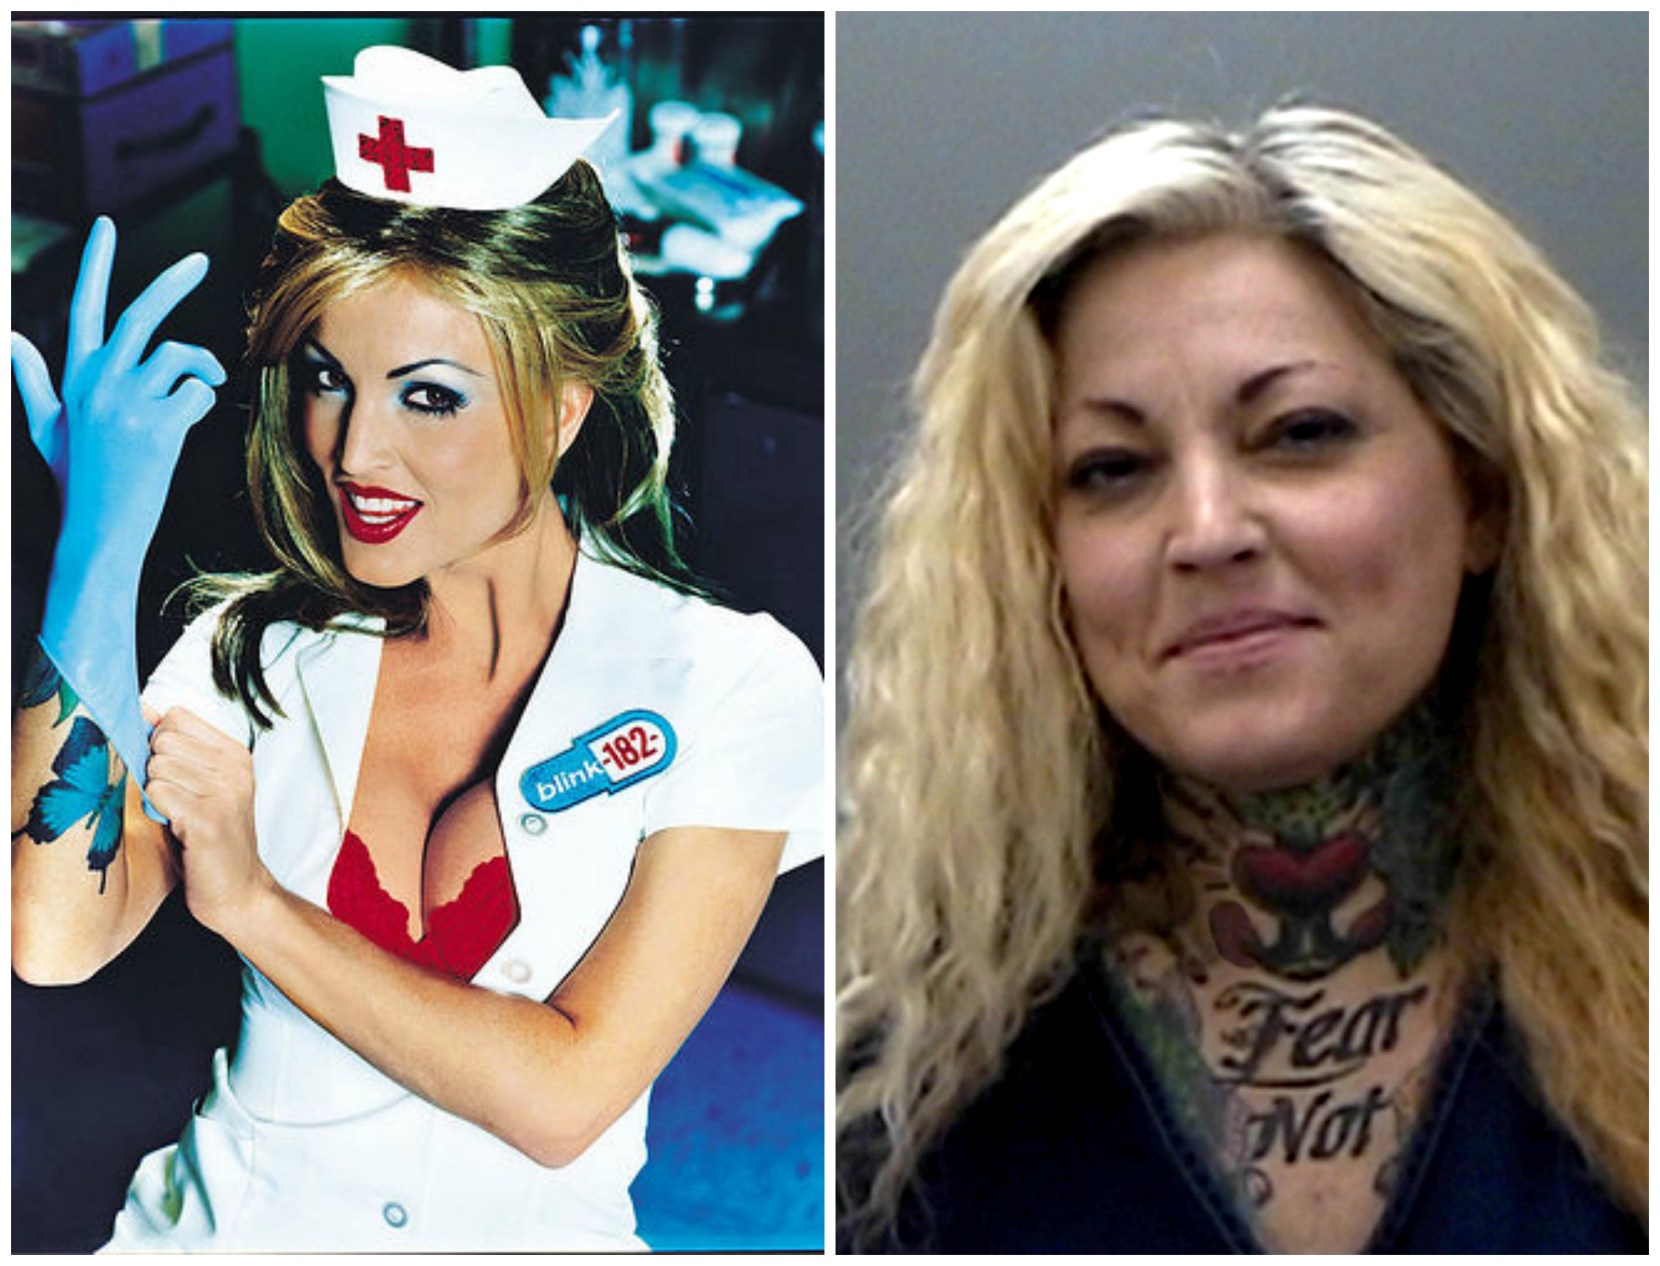 See the Sexy Nurse From the Blink-182 Album Cover Now